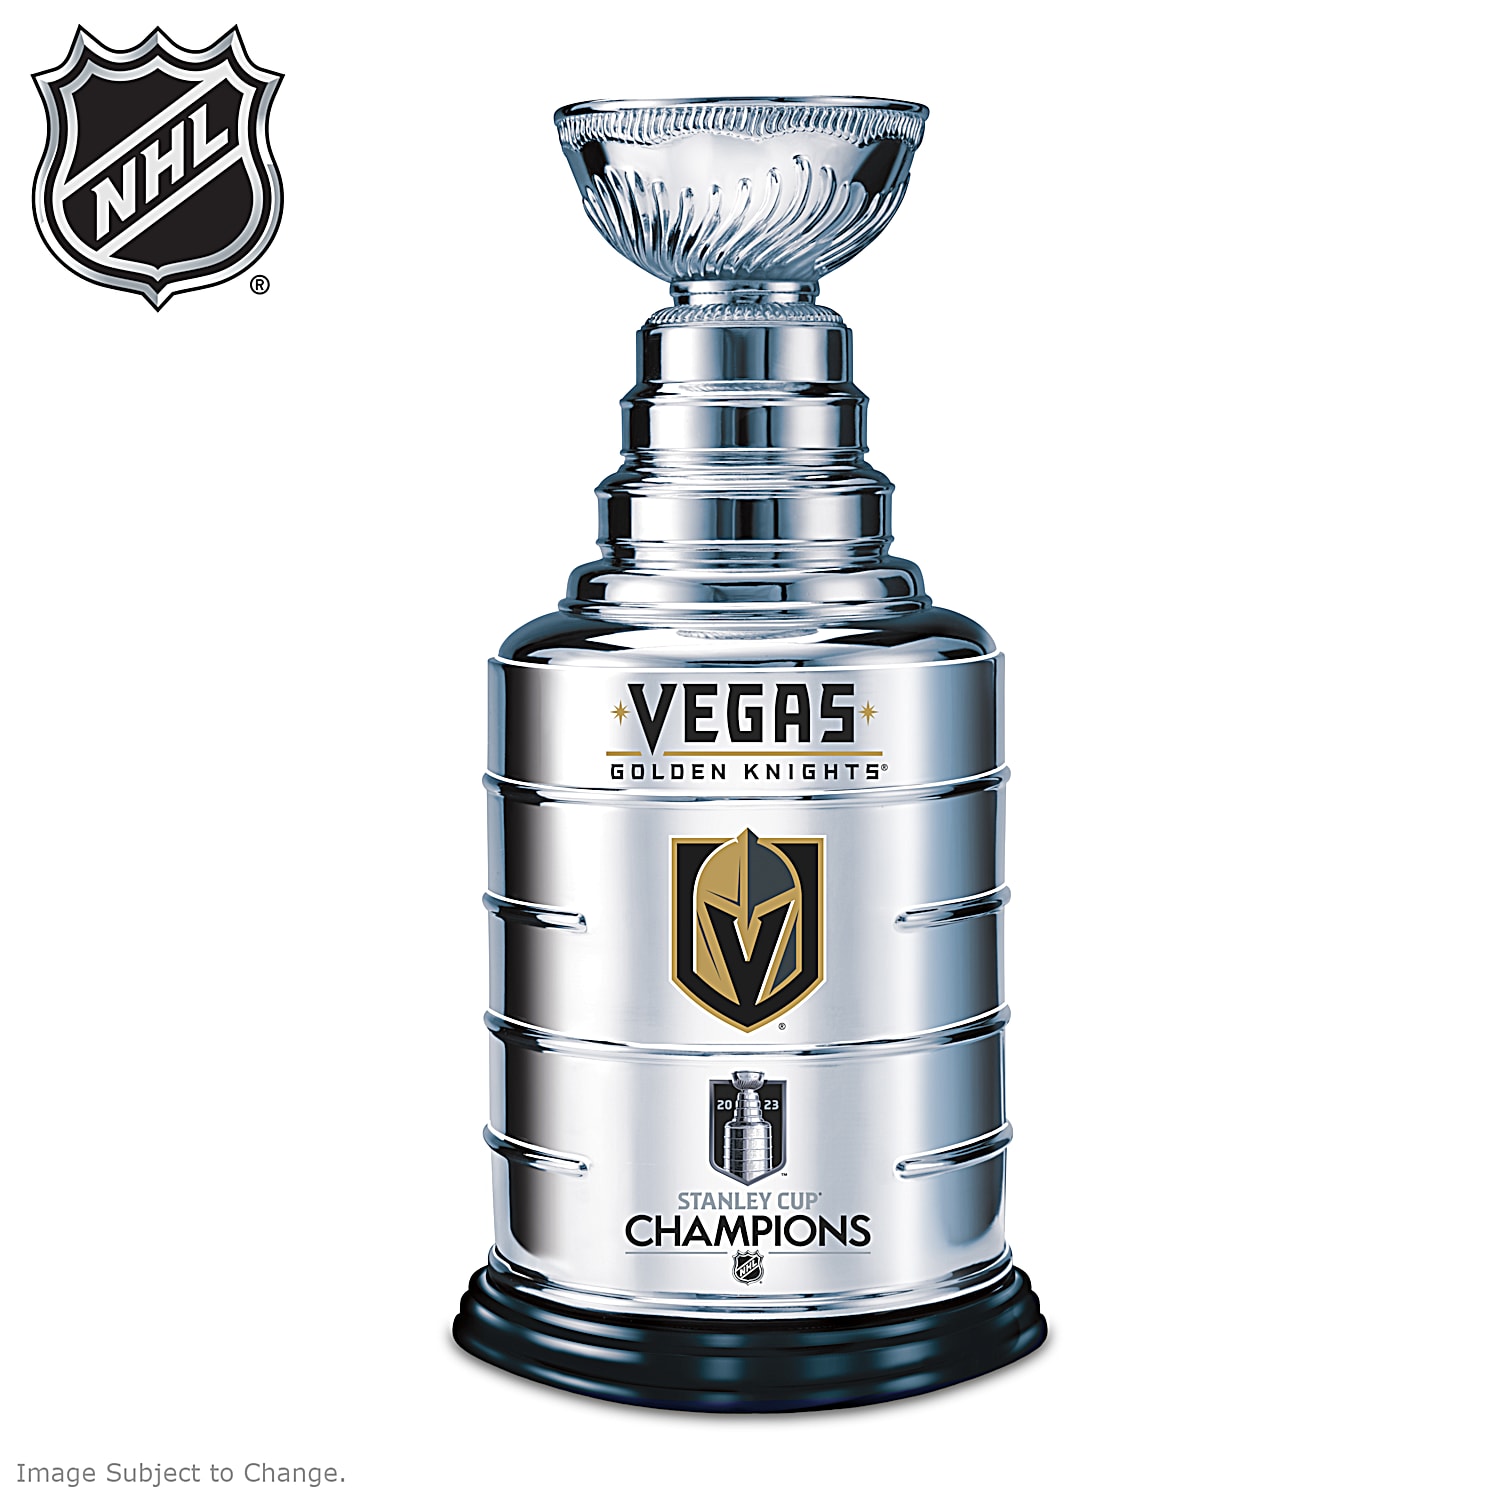 Vegas Golden Knights Stanley Cup Champs, how to buy your Knights